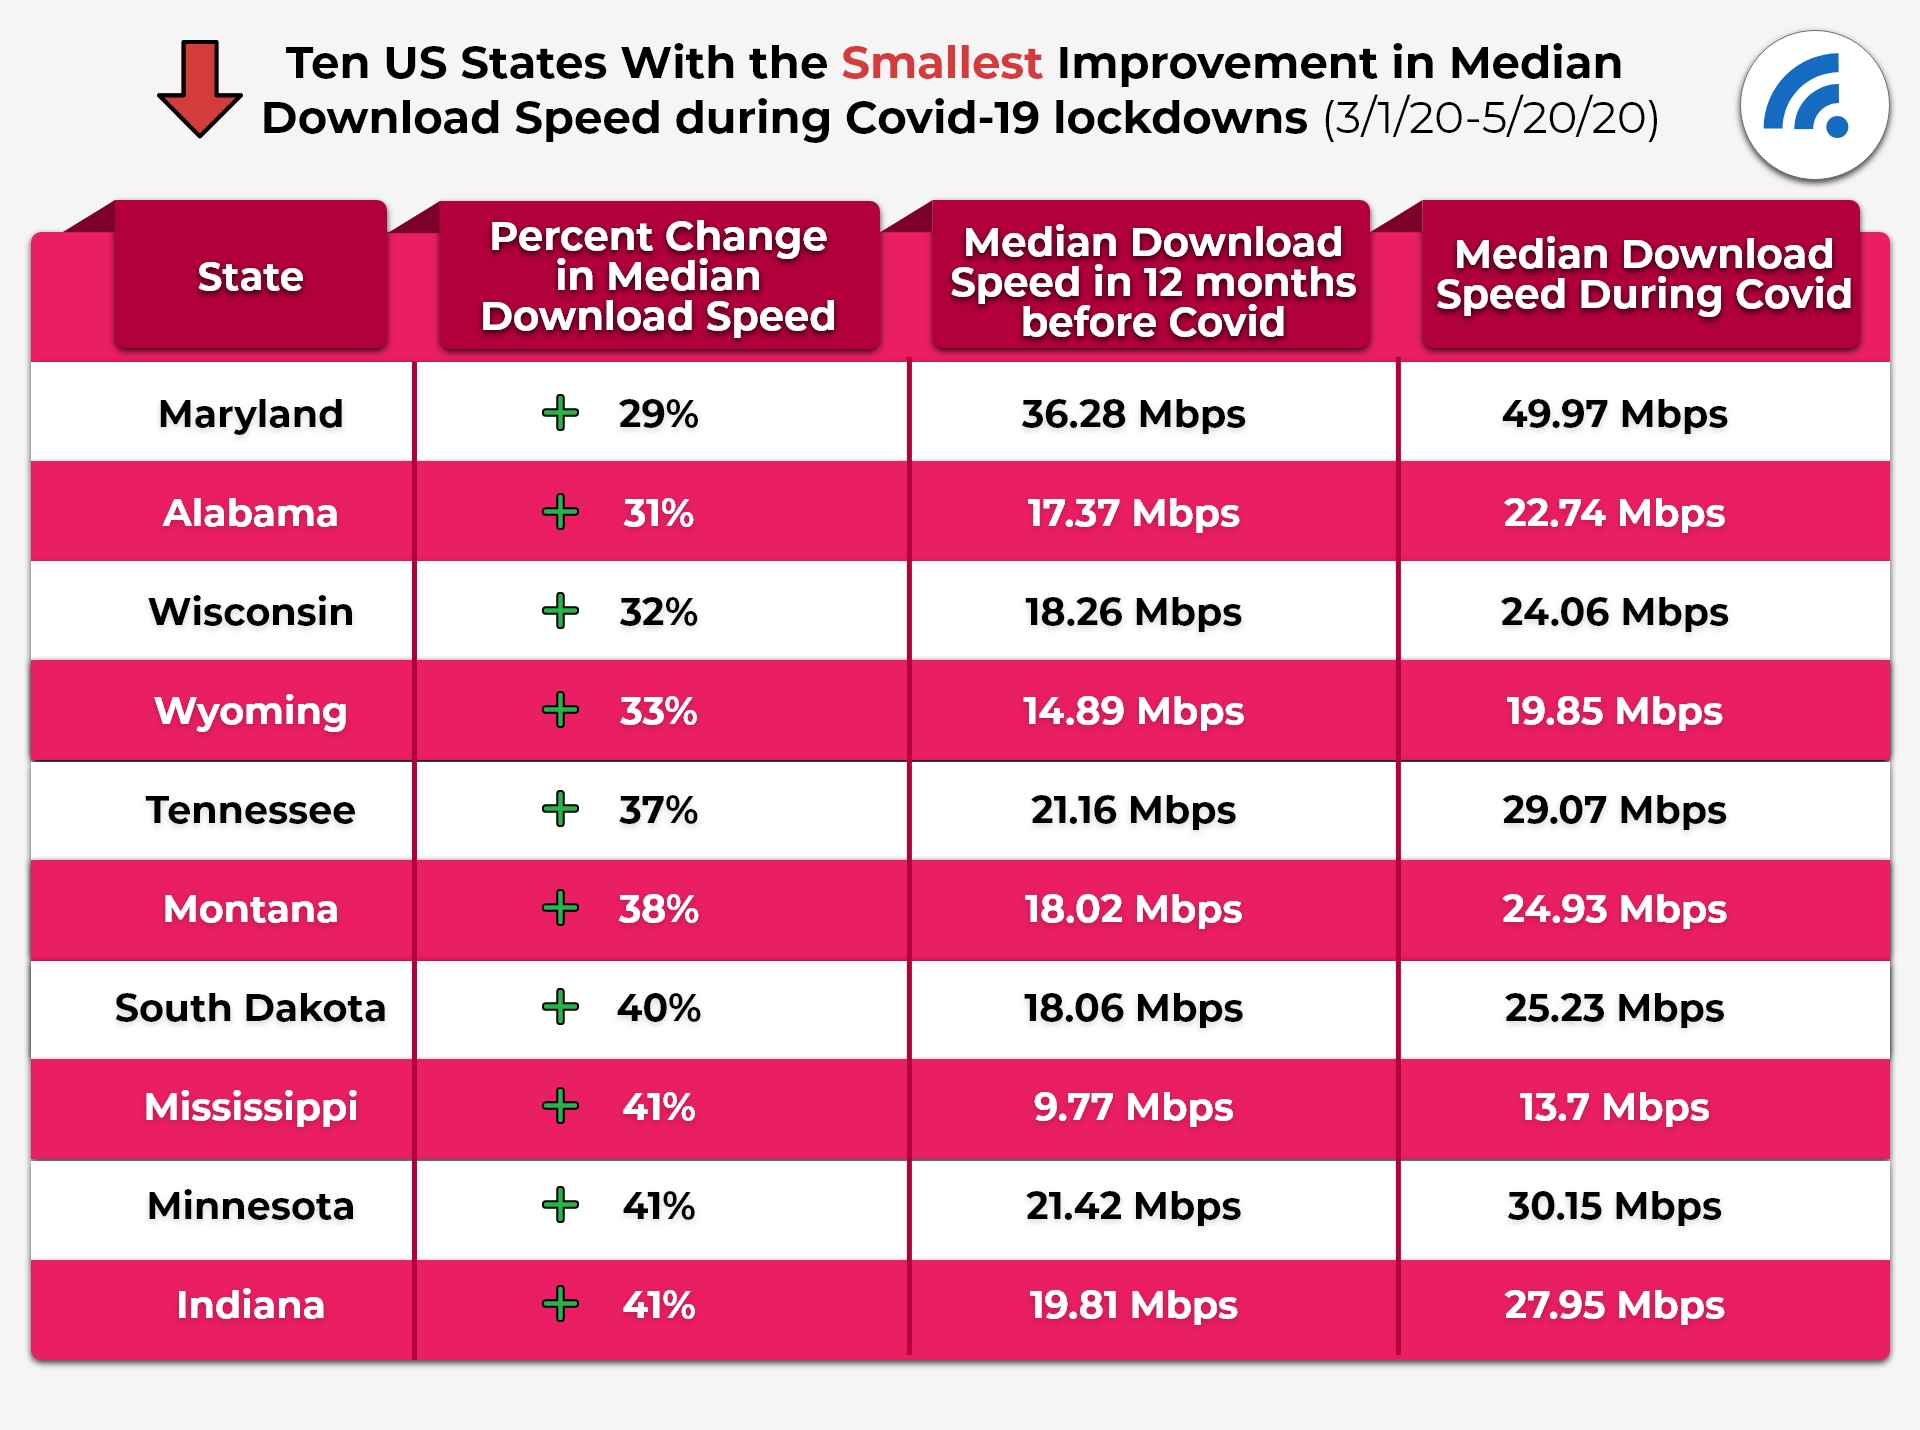 States With The Smallest Improvements In Dowload Speed During COVID-19 Lockdowns